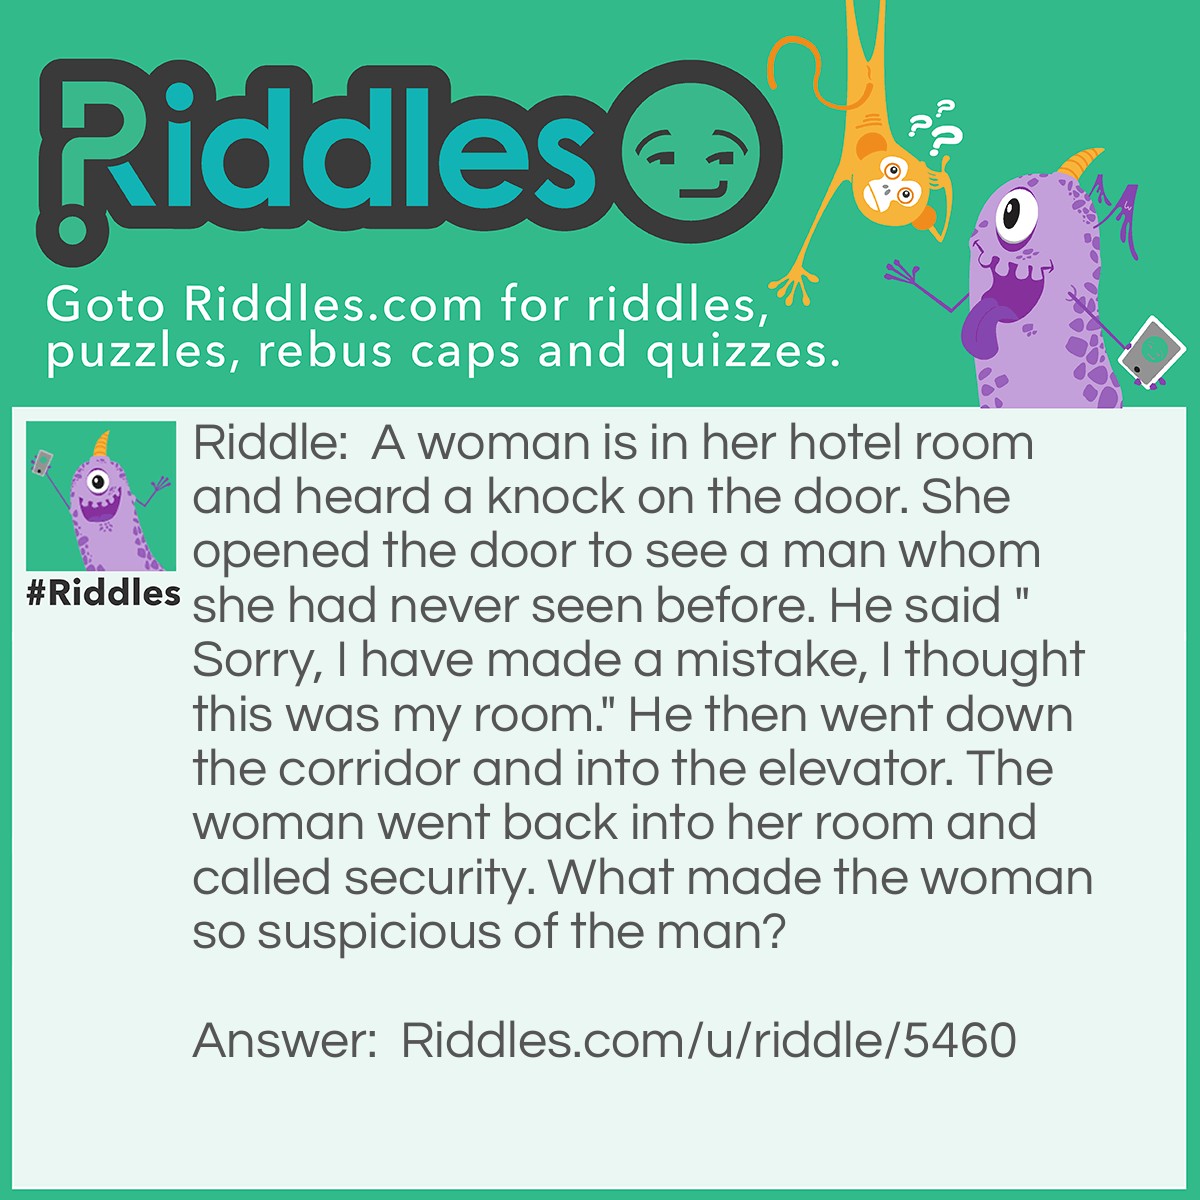 Riddle: A woman is in her hotel room and heard a knock on the door. She opened the door to see a man whom she had never seen before. He said "Sorry, I have made a mistake, I thought this was my room." He then went down the corridor and into the elevator. The woman went back into her room and called security. What made the woman so suspicious of the man? Answer: Because you don’t knock on your own hotel room door!